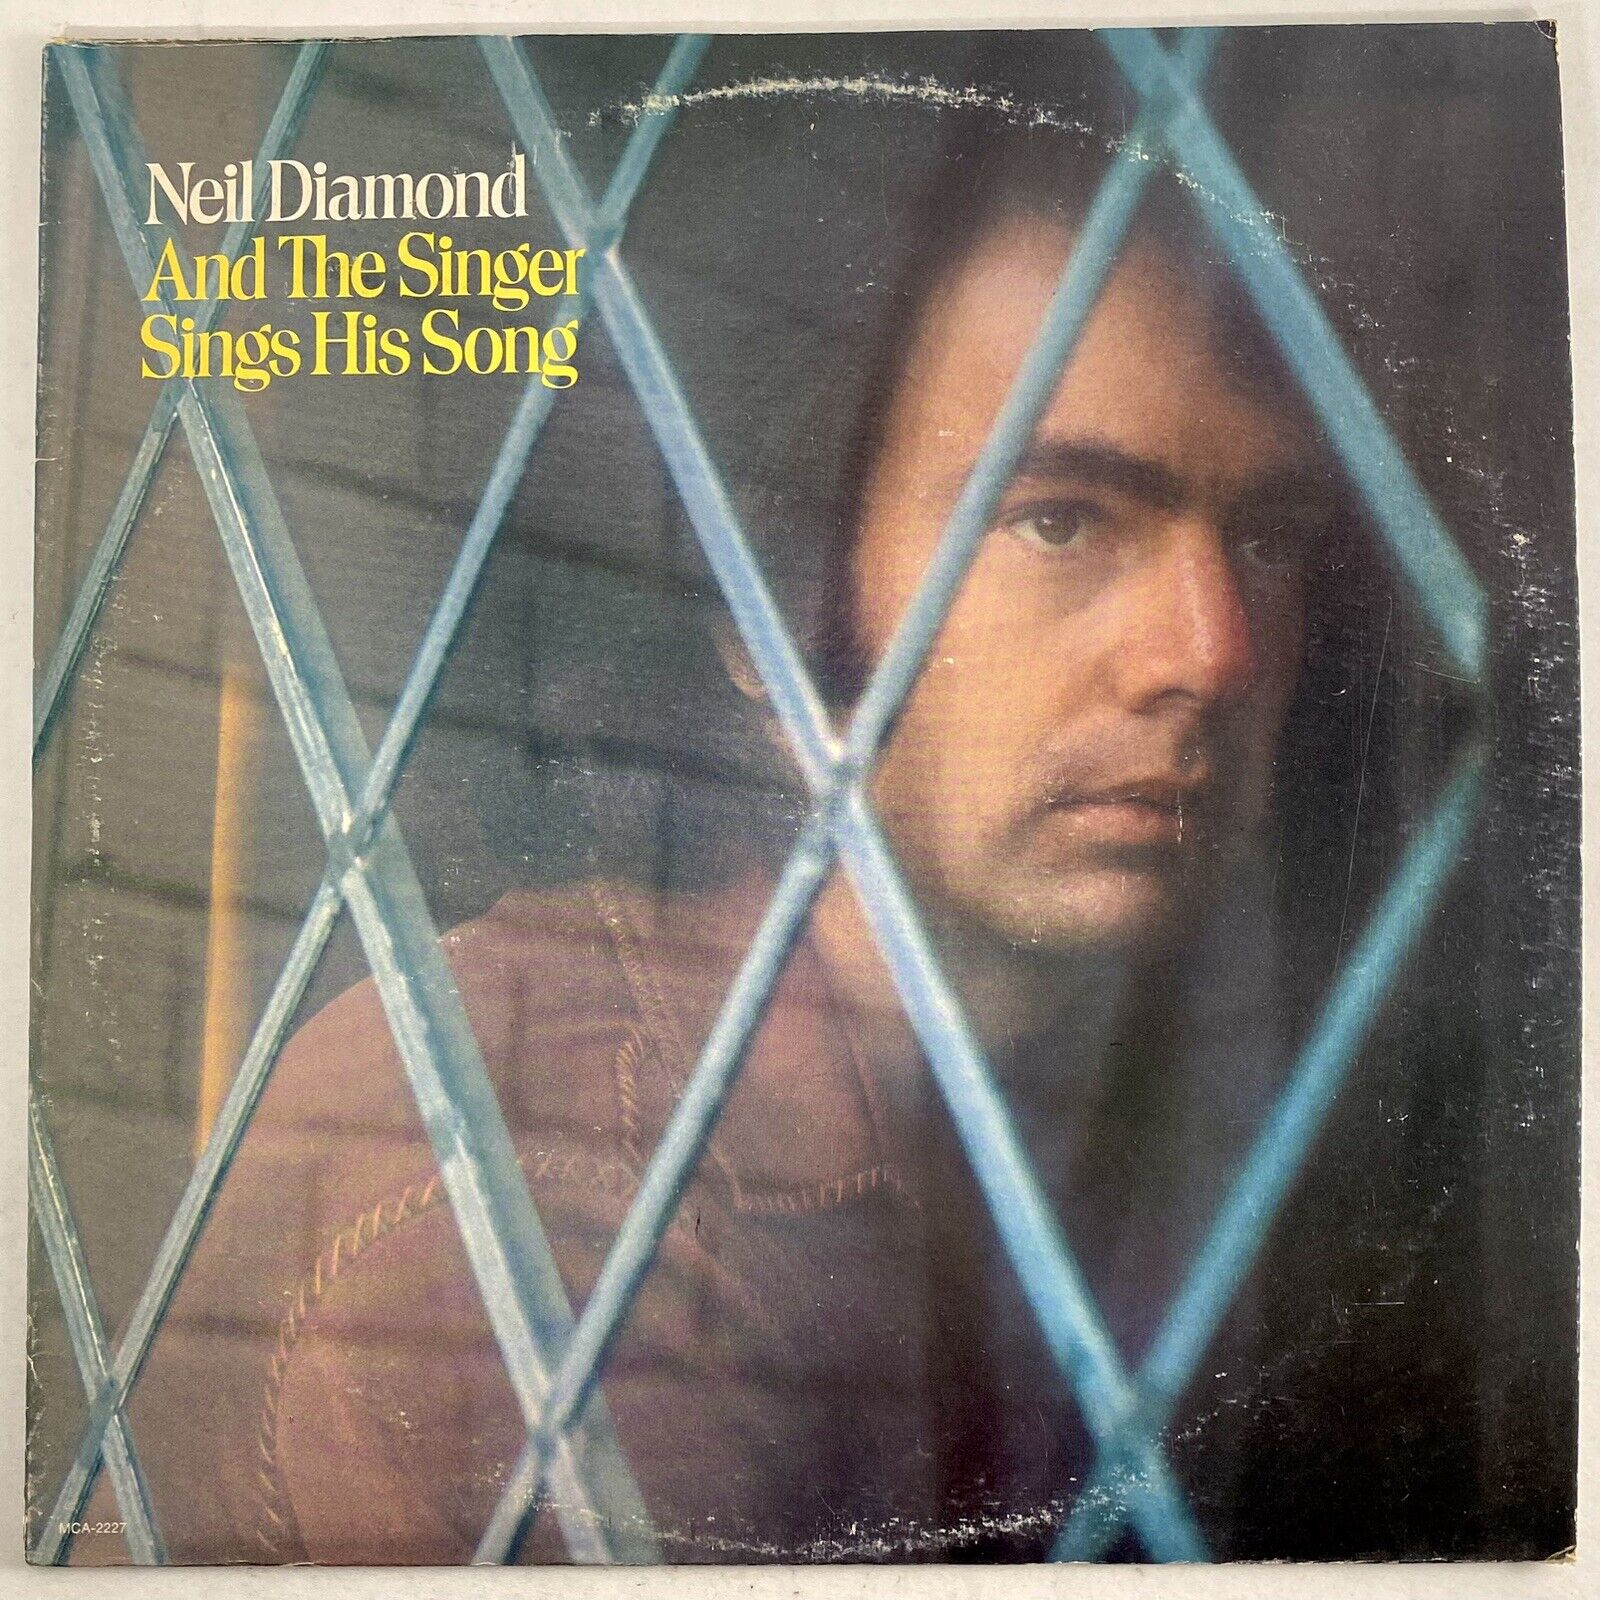 Vintage Neil Diamond And The Singer Sings His Song 1976 LP Vinyl Record MCA-2227